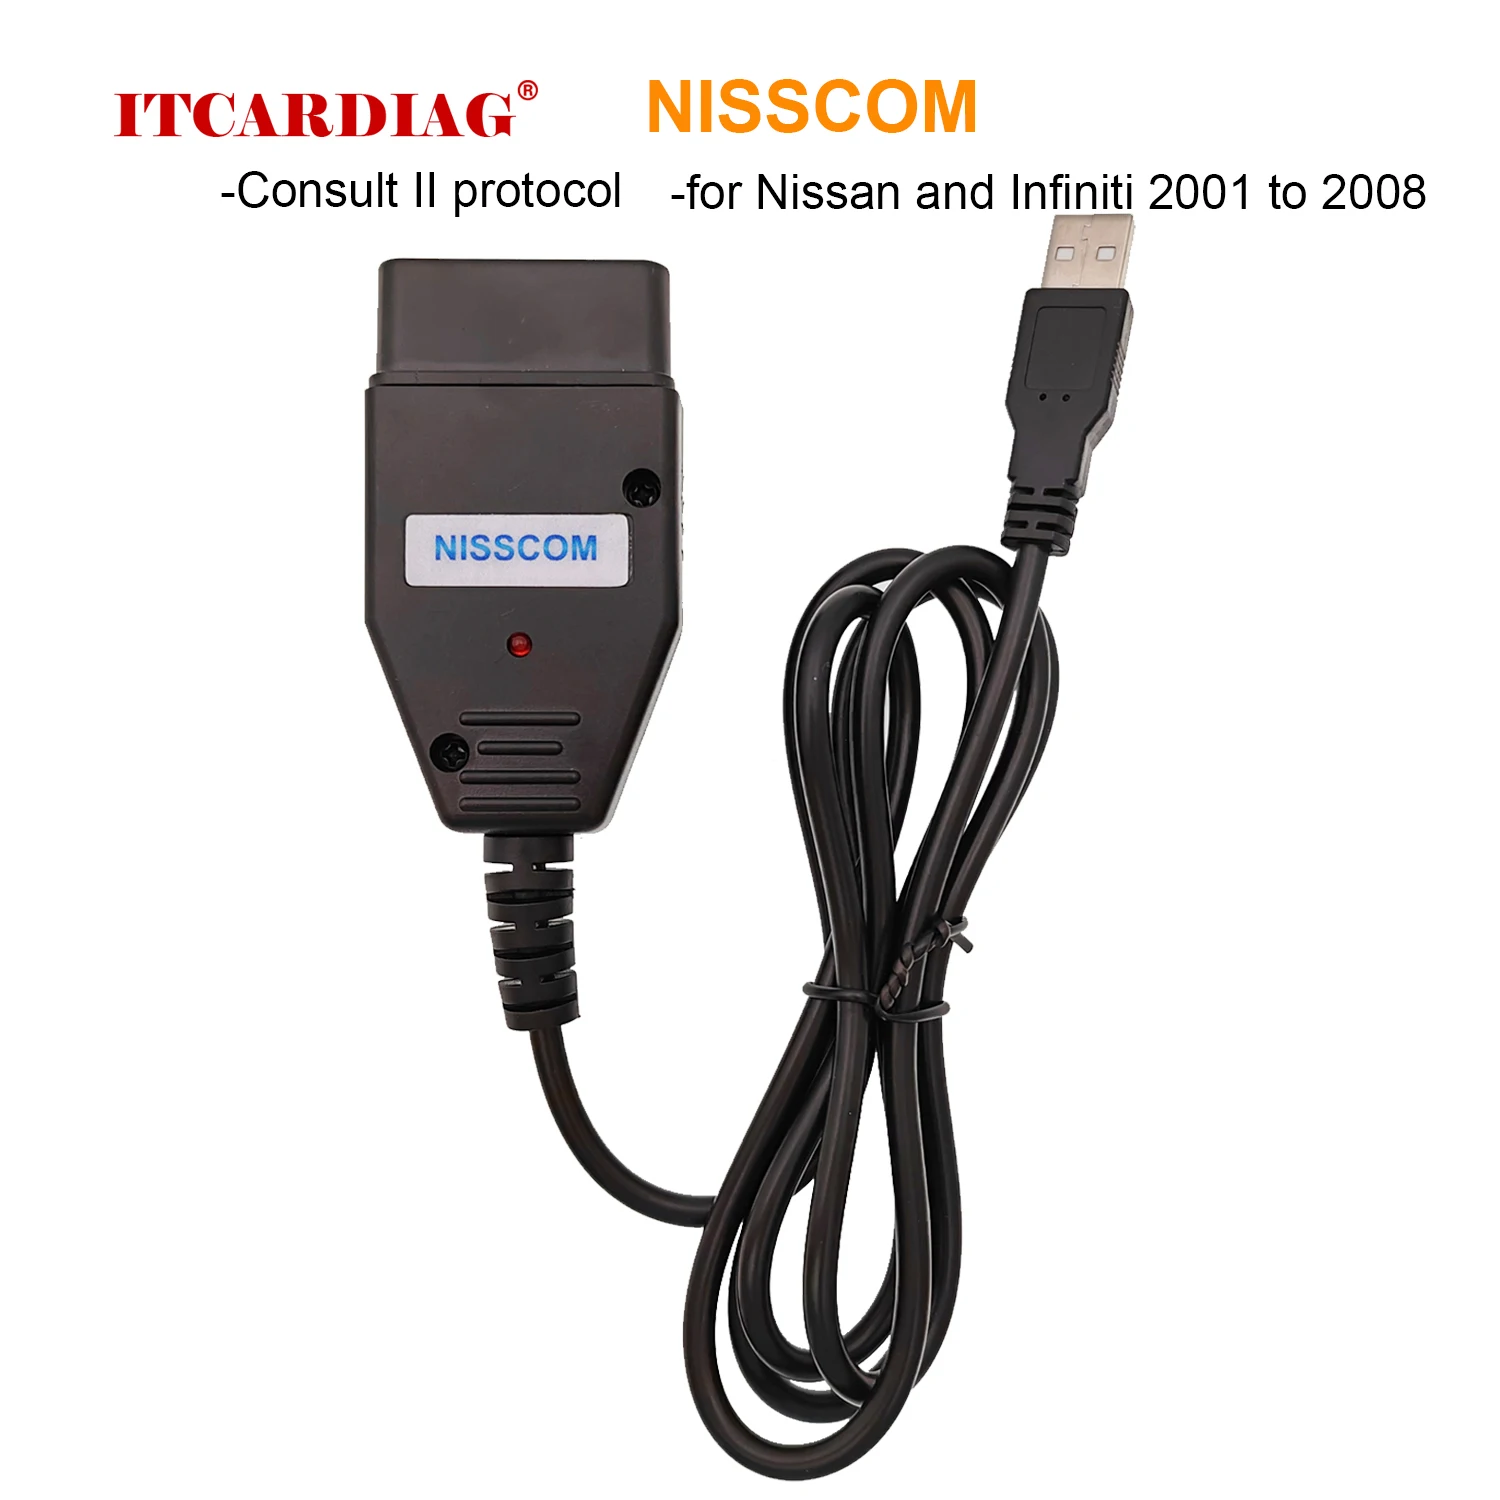 

ITCARDIAG NISSCOM Consult Interface for Nissan and Infiniti OBD2 Diagnostic Tool For Immobiliser Key Steering Angle Sensor Reset